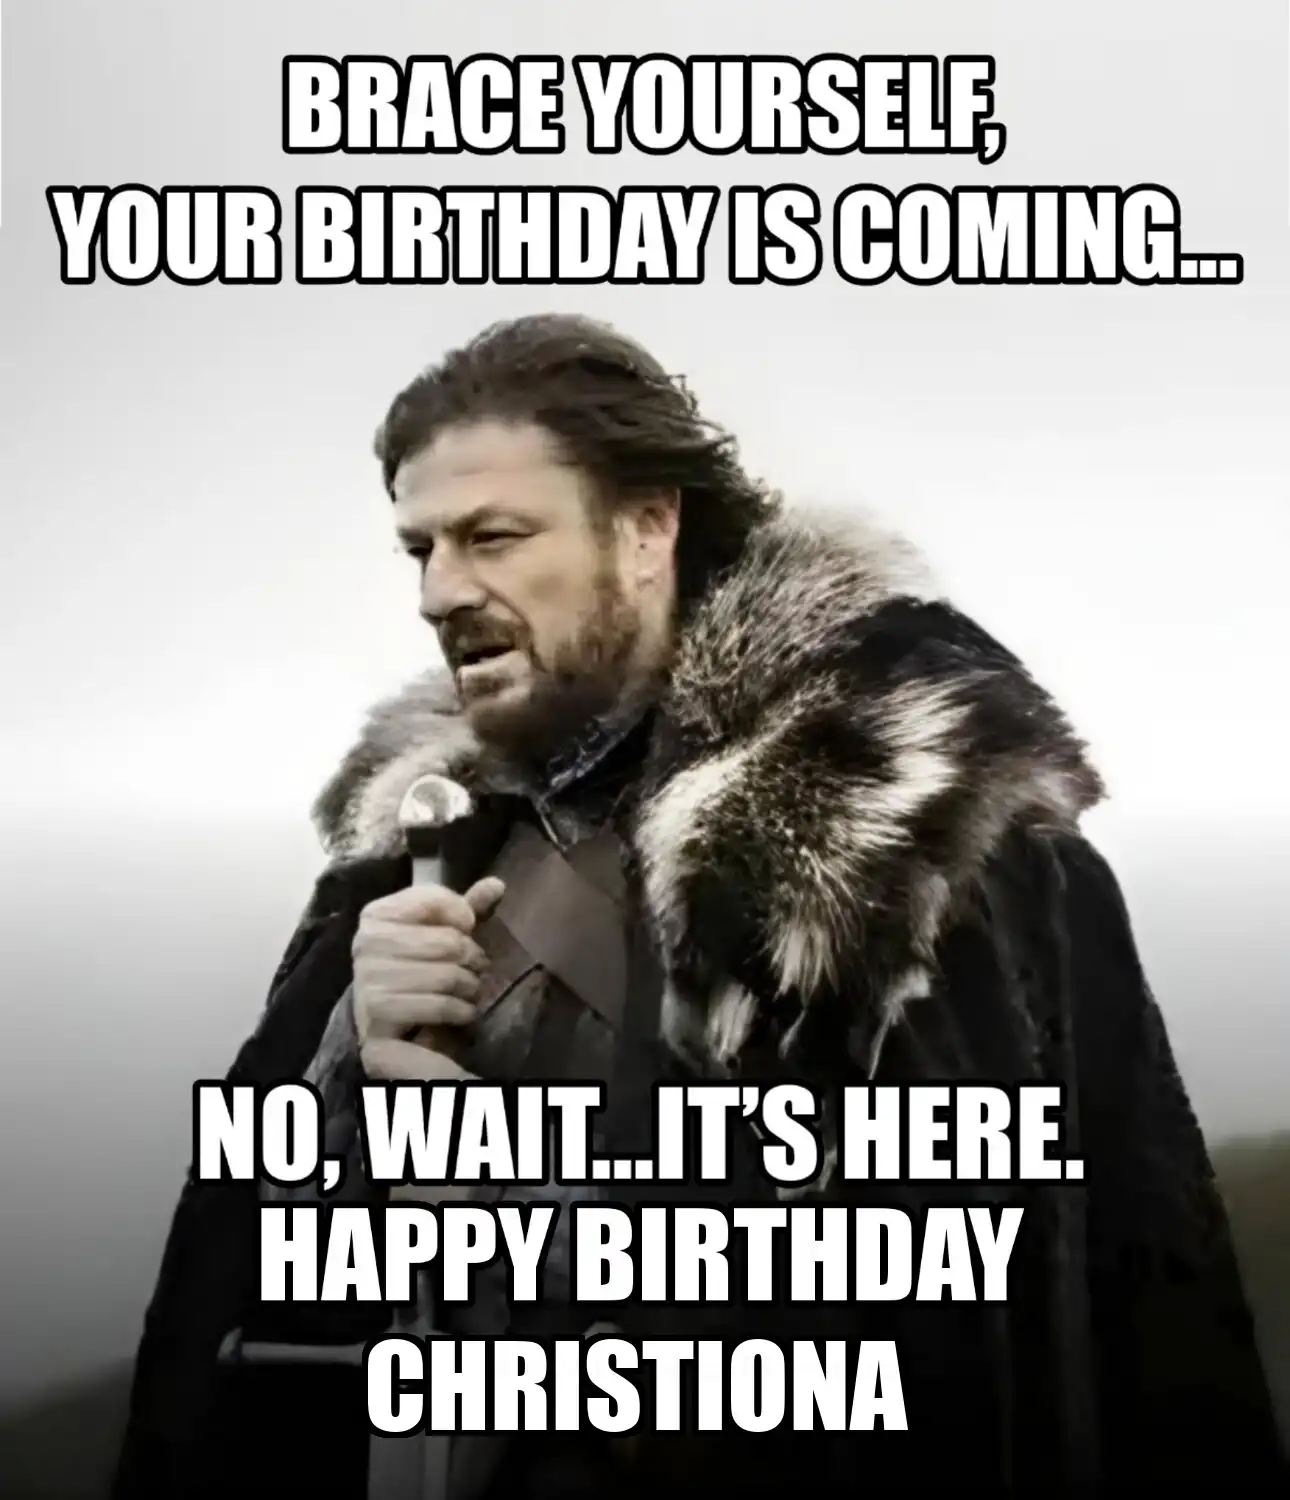 Happy Birthday Christiona Brace Yourself Your Birthday Is Coming Meme